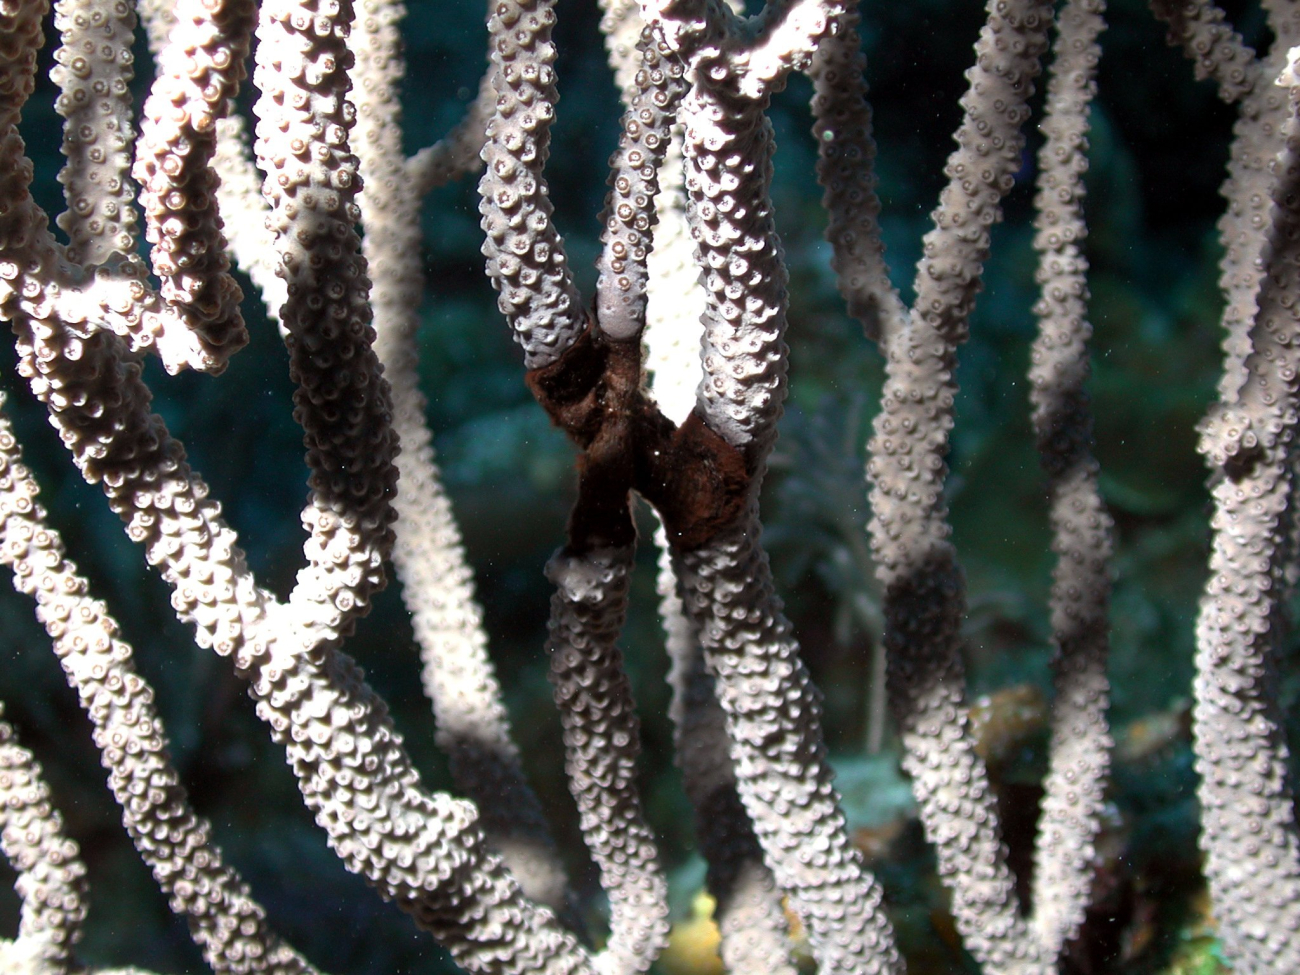 Cyanobacteria are increasingly common on Caribbean coral reefs and arefrequently found overgrowing benthic organisms such as this soft coral(Eunicea sp